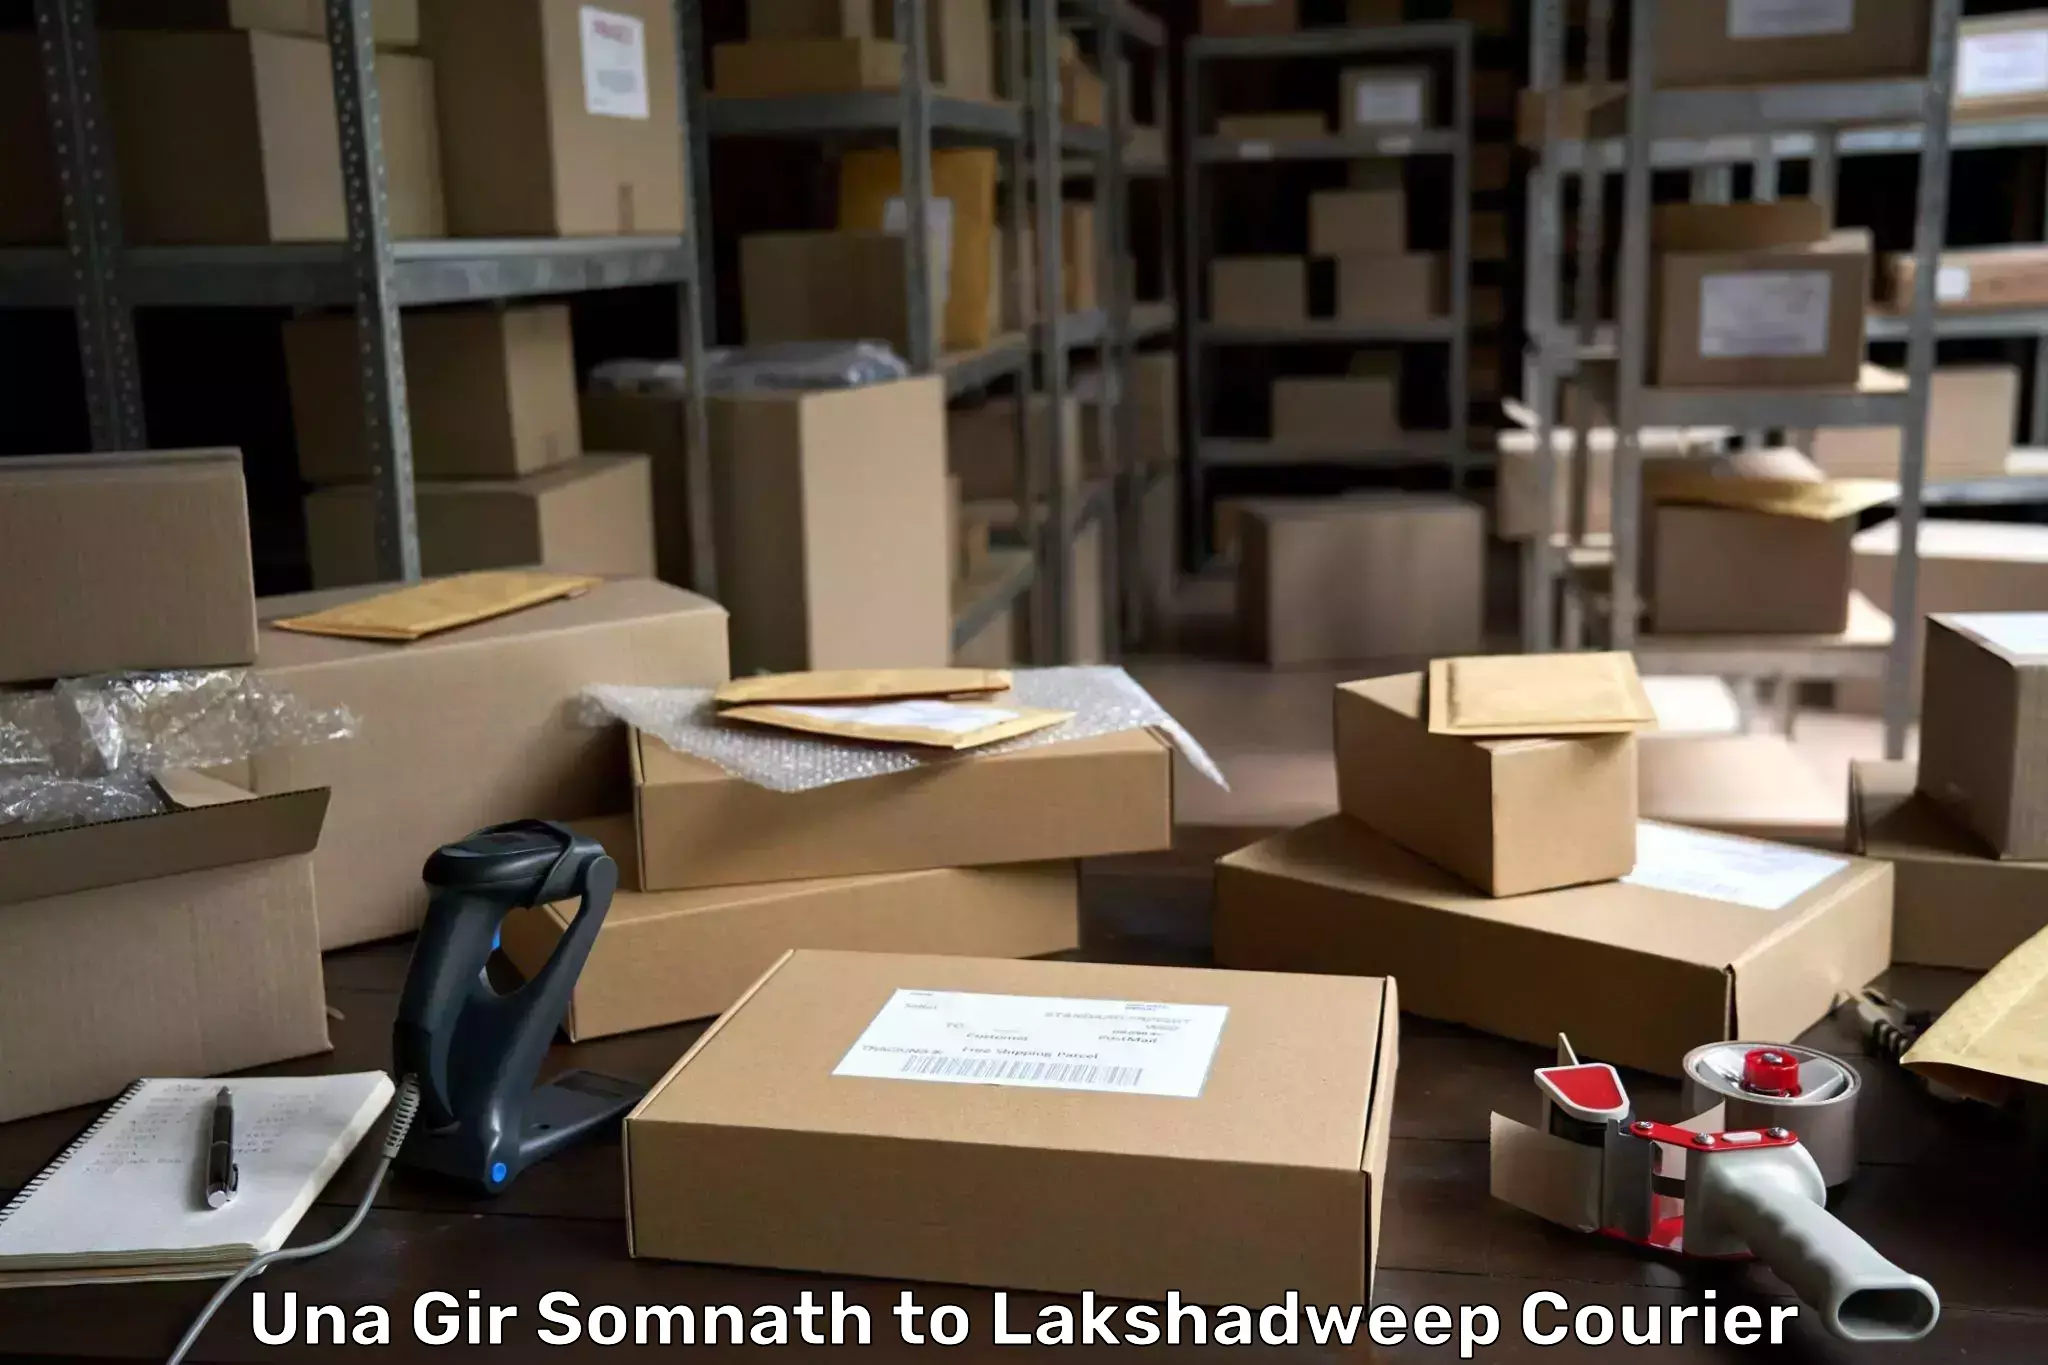 Ocean freight courier Una Gir Somnath to Lakshadweep